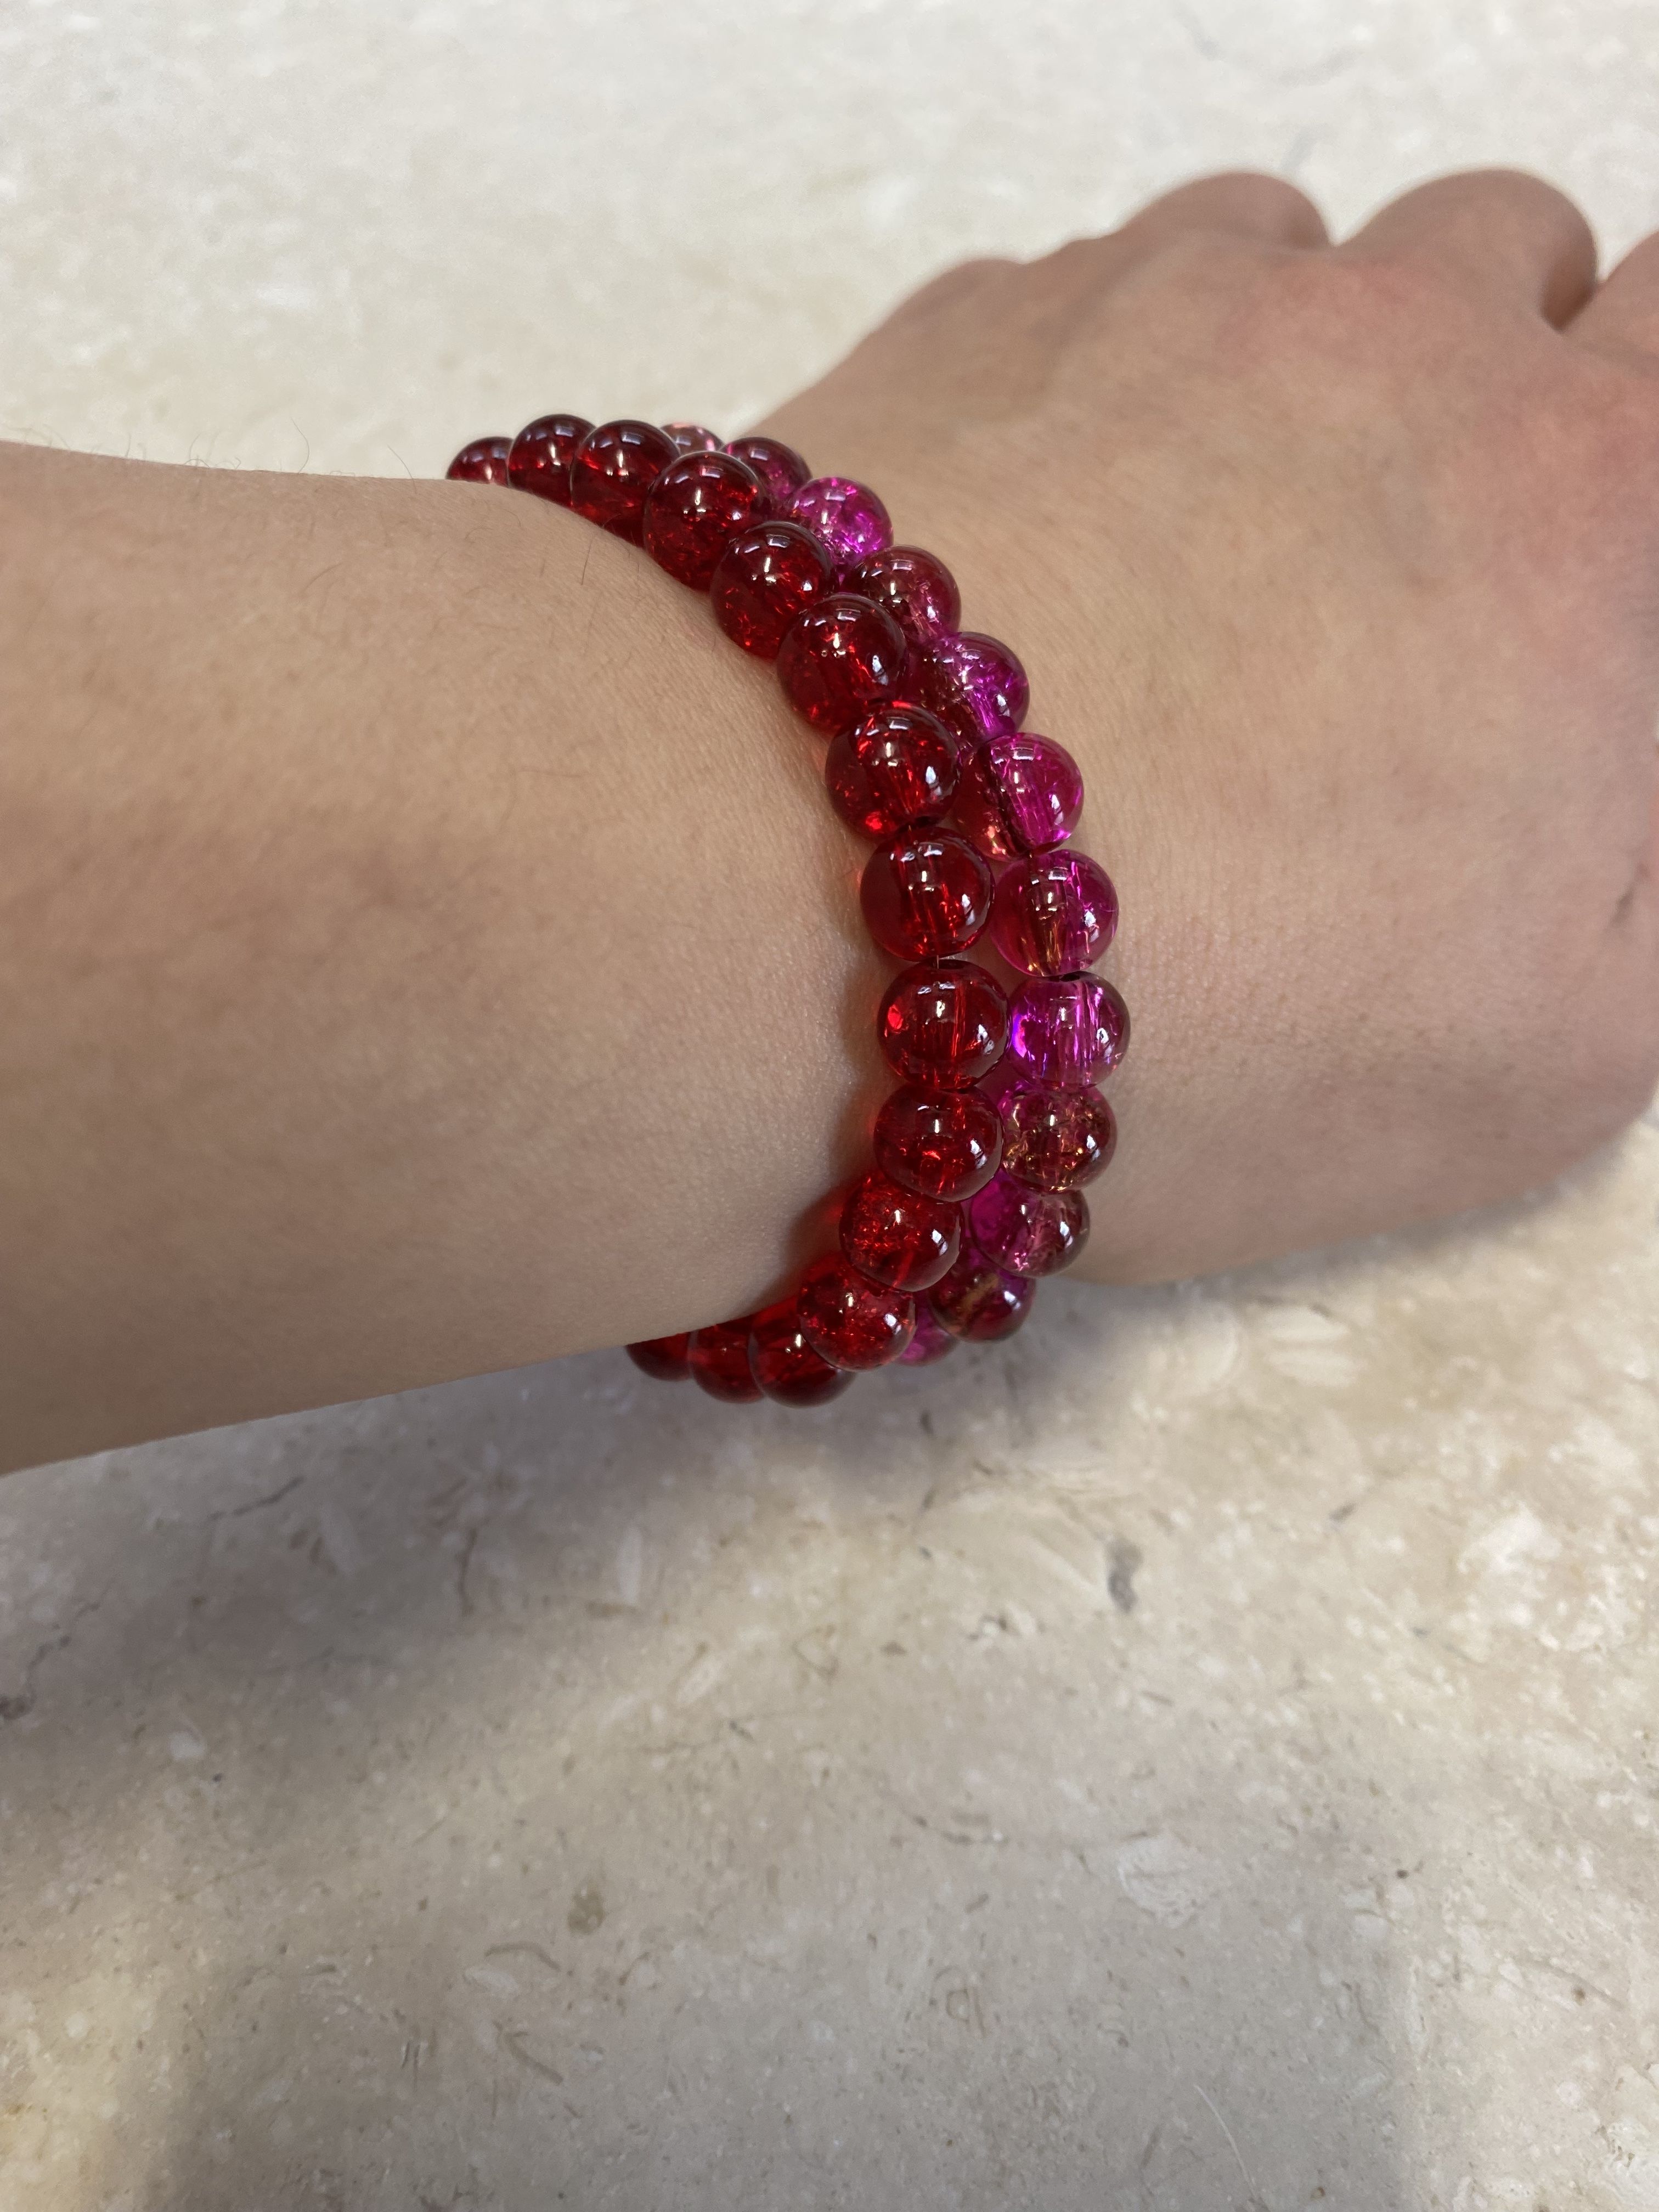 Set of 2 Stackable Glass Beaded Bracelet (Shades of Red) - Stackable Crackle Glass Beaded Bracelet - Handmade Glass Beaded Bracelet